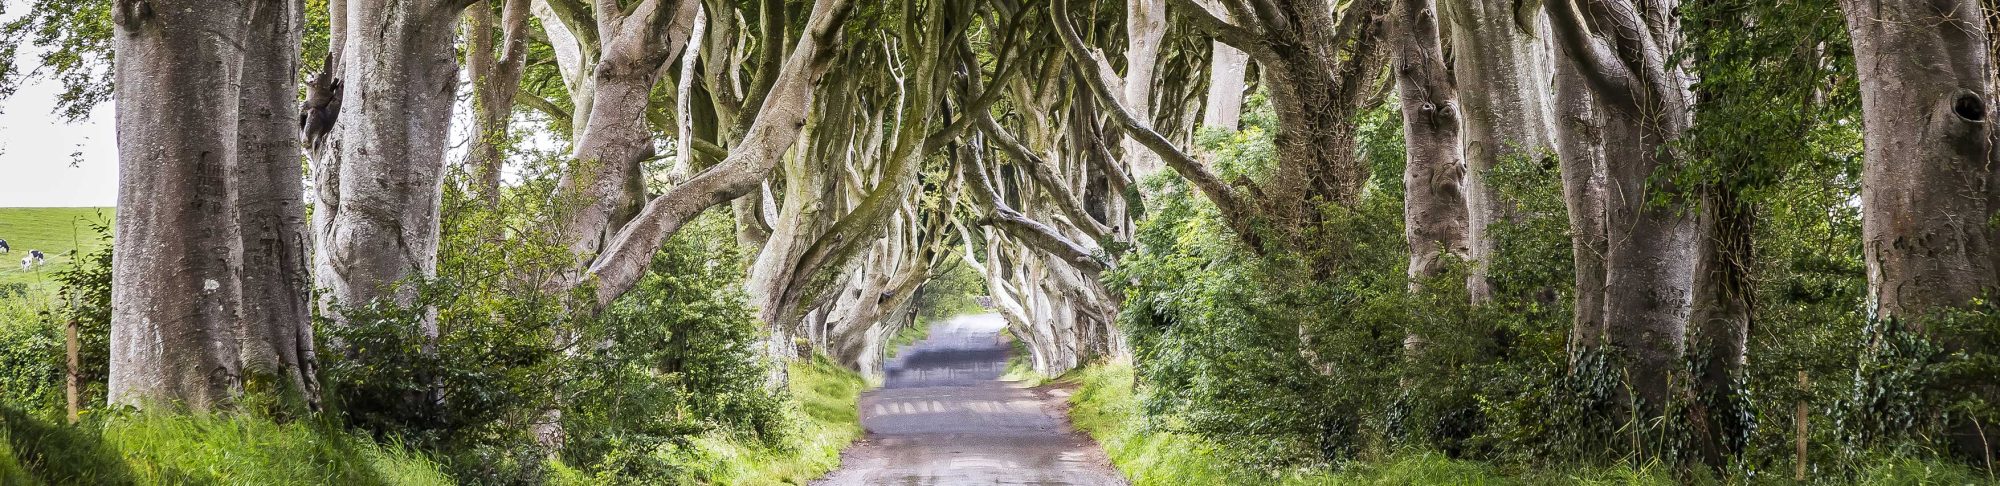 Game of Thrones Tours Northern Ireland